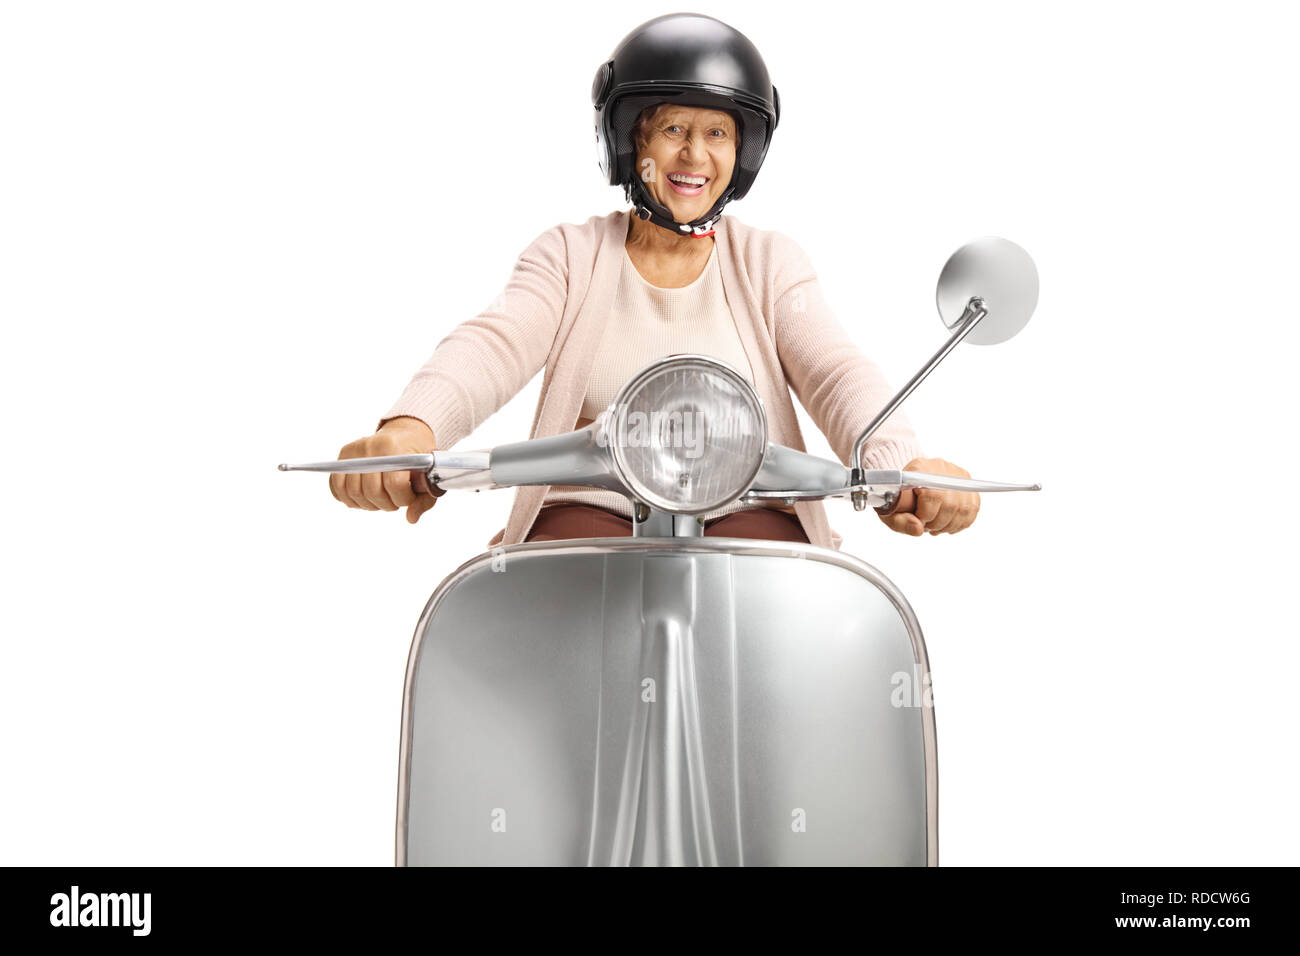 Cheerful senior woman with a helmet riding a vintage scooter isolated on white background Stock Photo